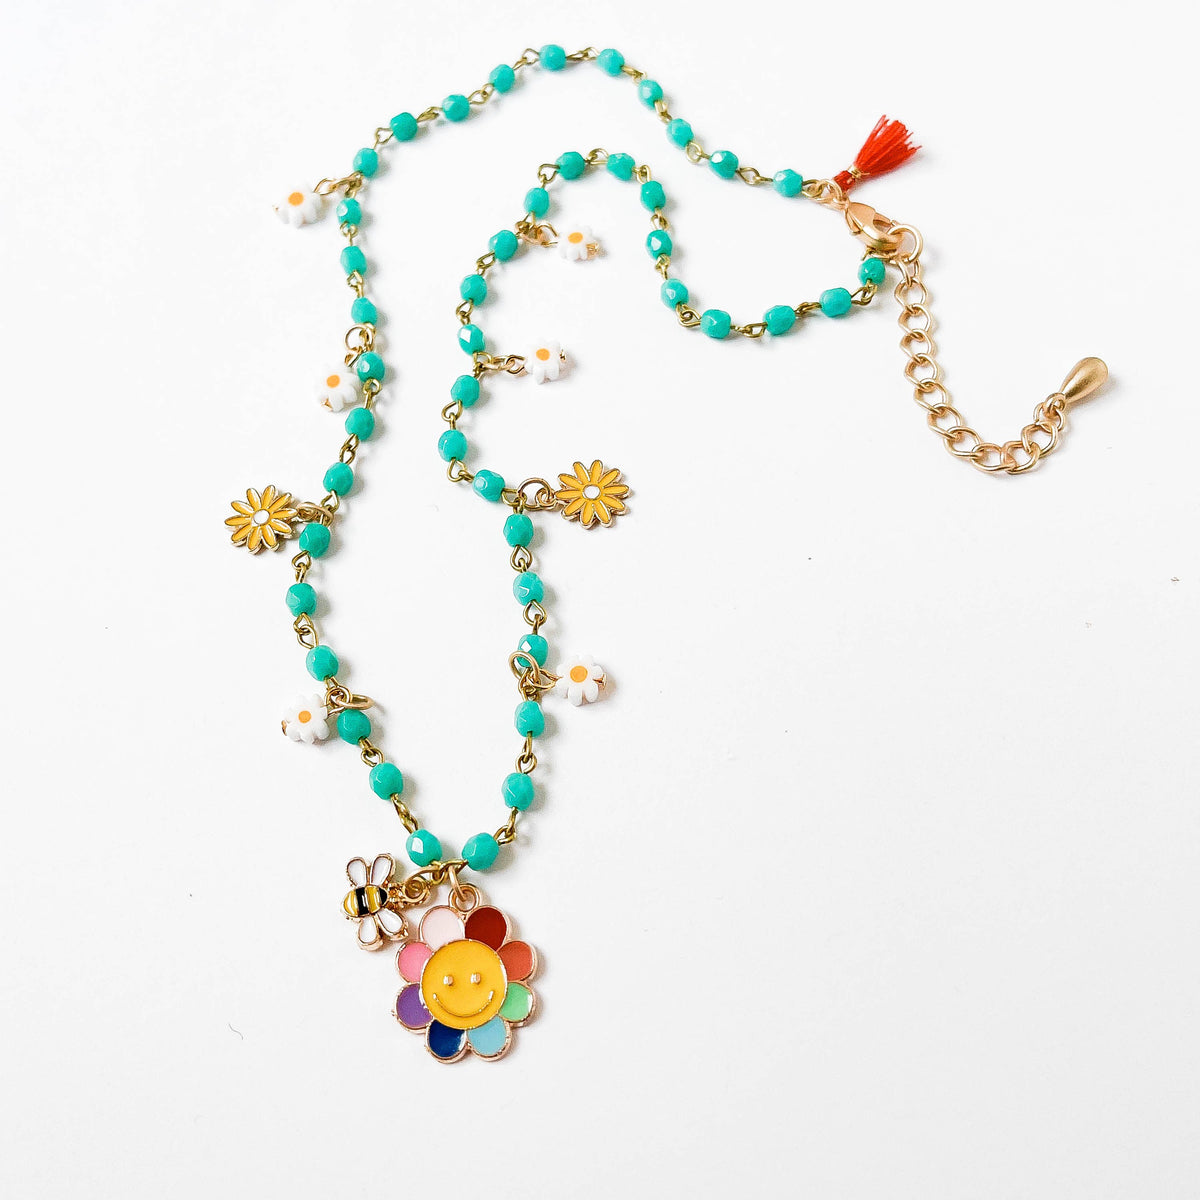 Rainbow Flower Charm Necklace with Turquoise beads